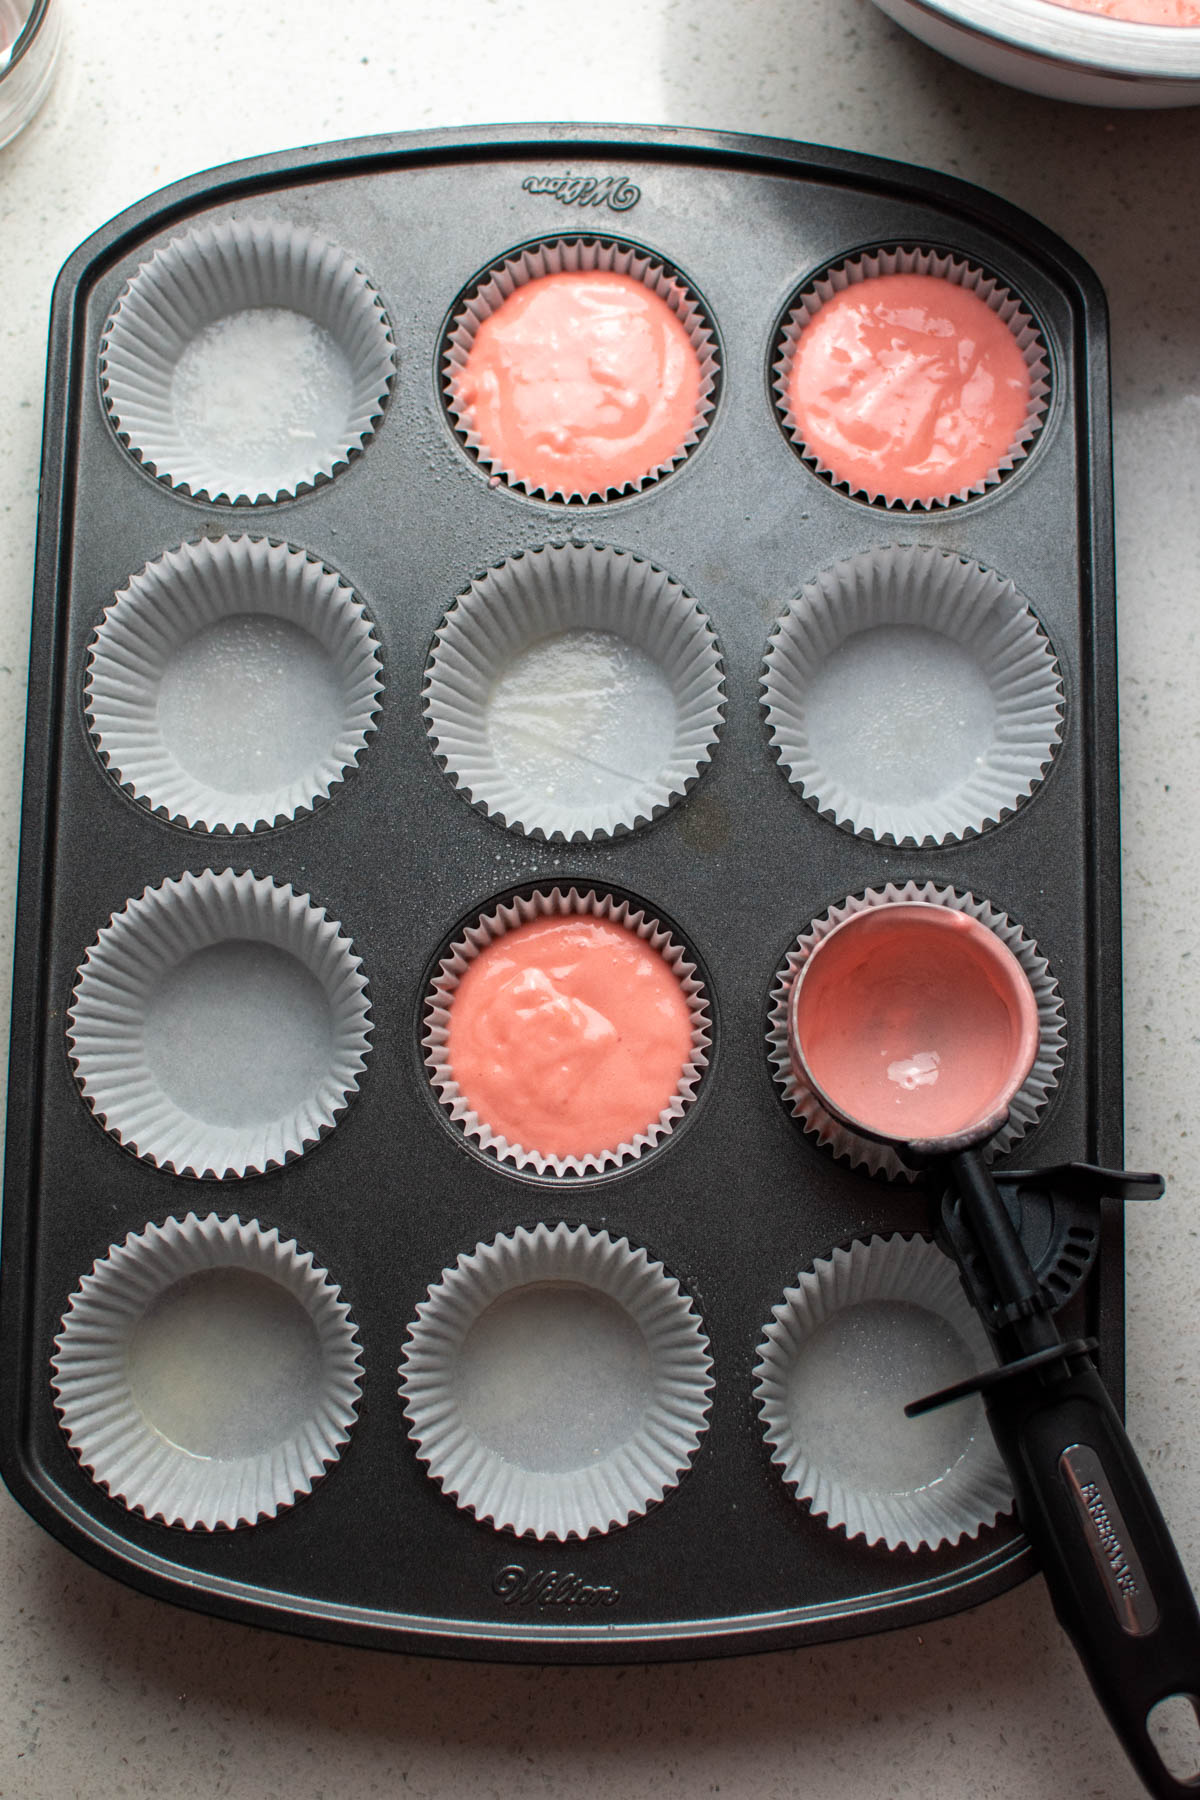 Pink cupcake batter in a few liners of cupcake tin with other liners empty.